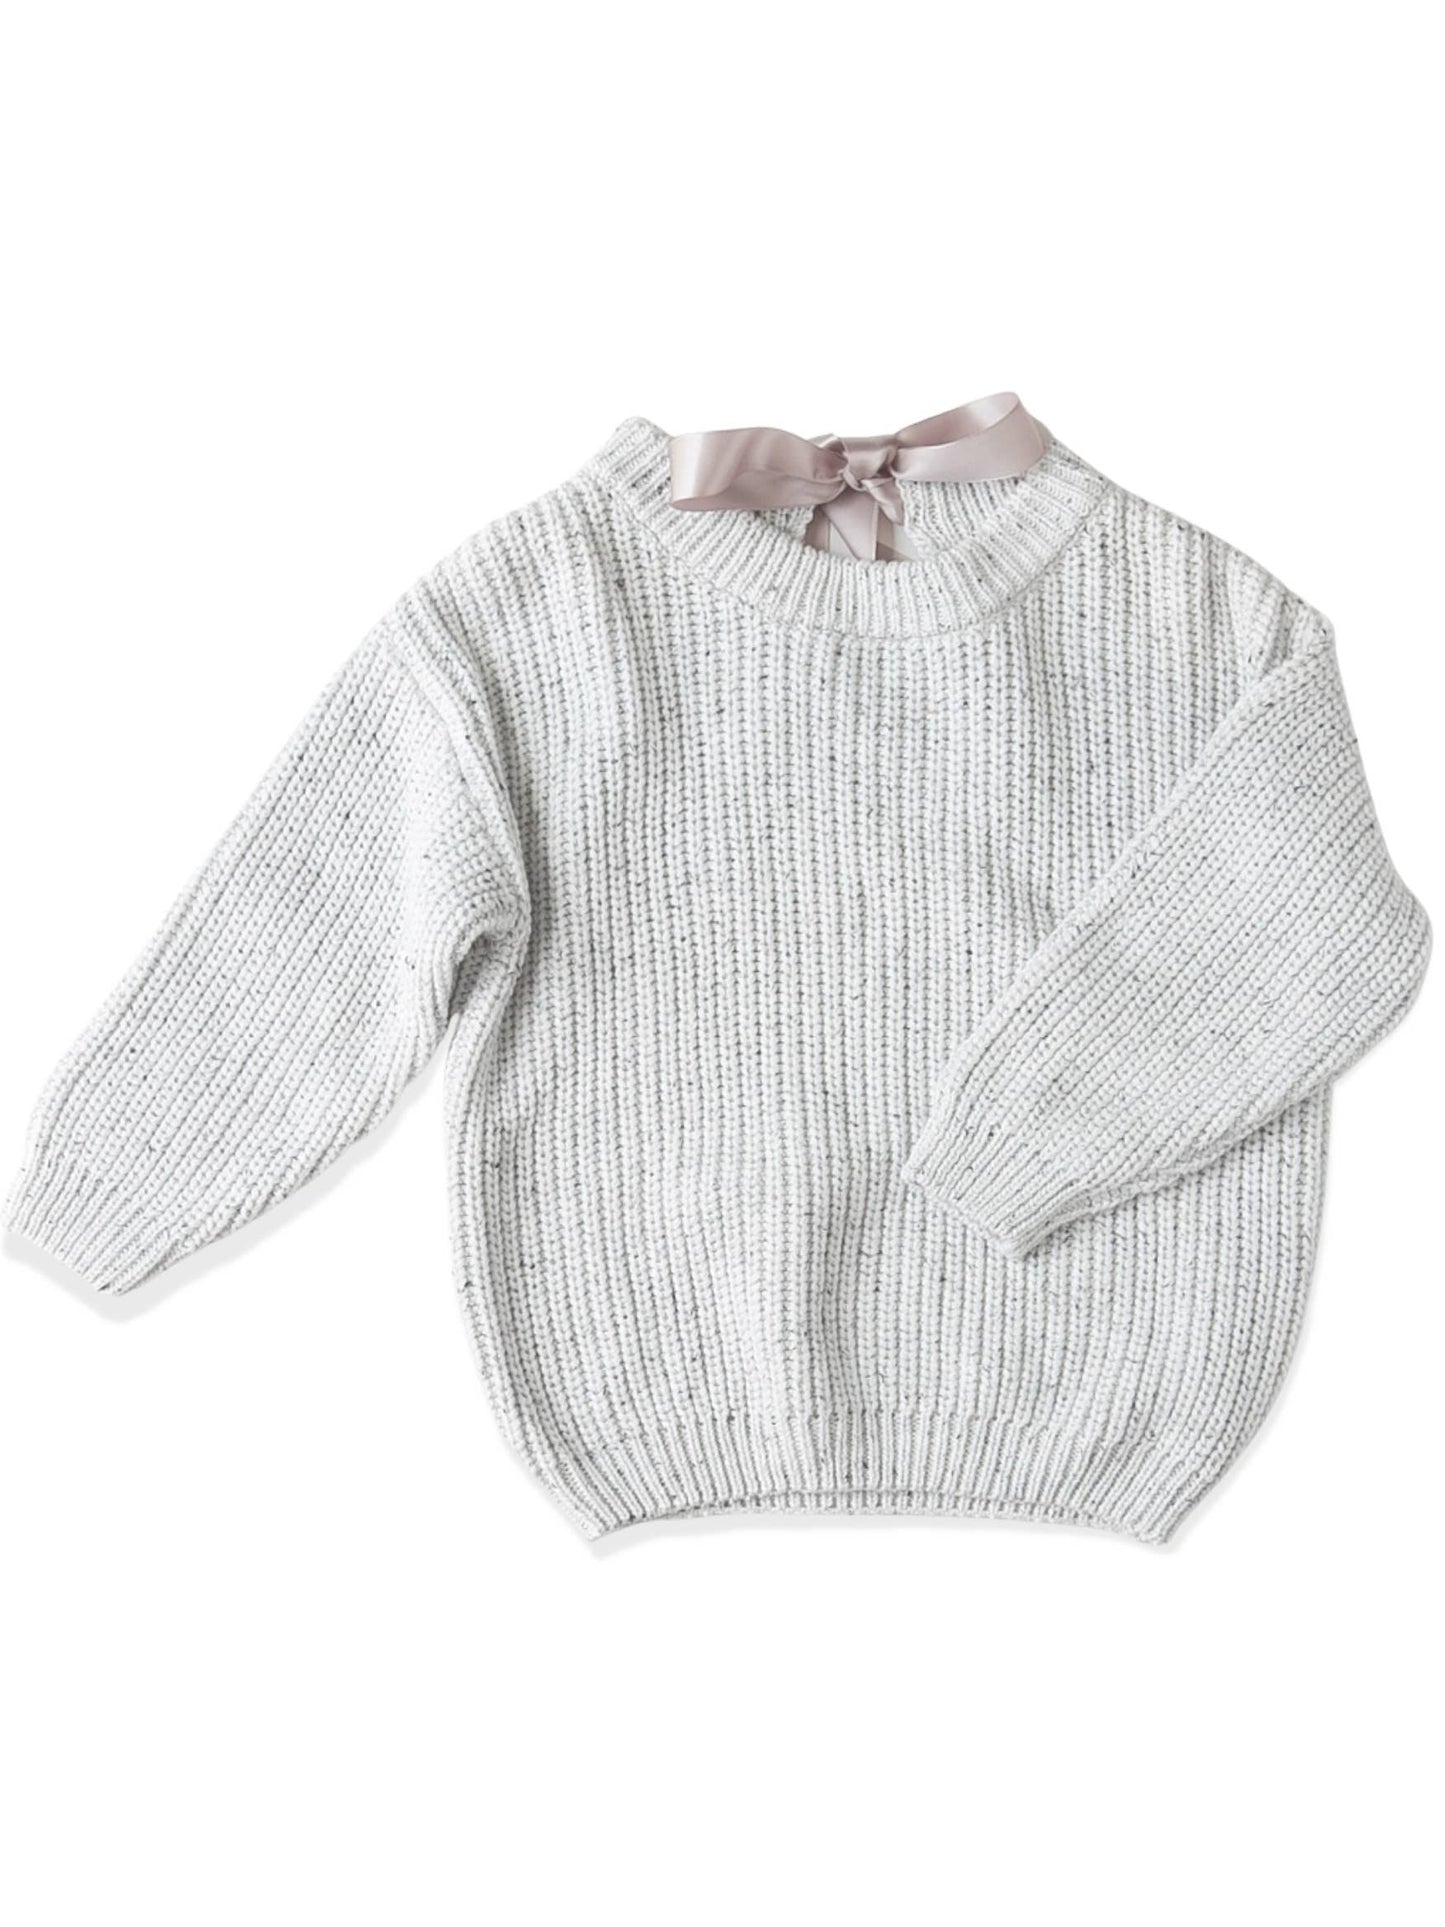 The Classic Sweater with Bow in Marle Grey